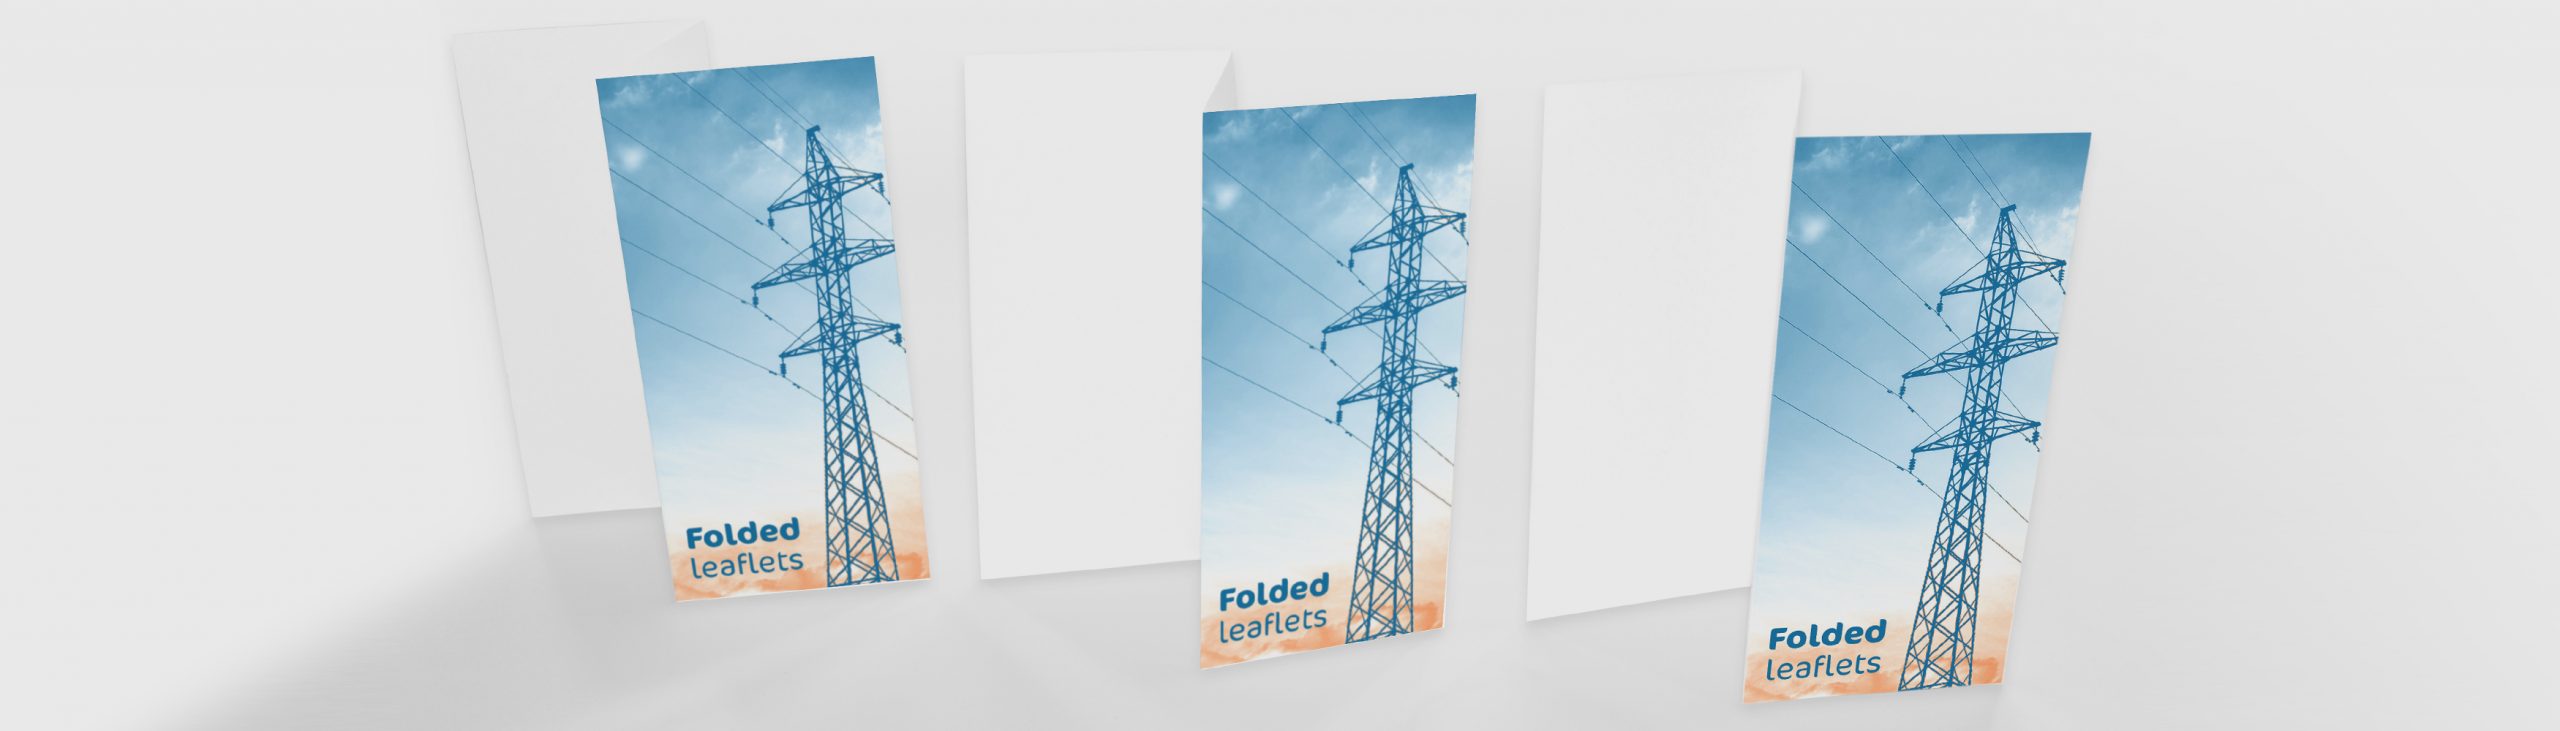 folded leaflets: printing service in sheffield